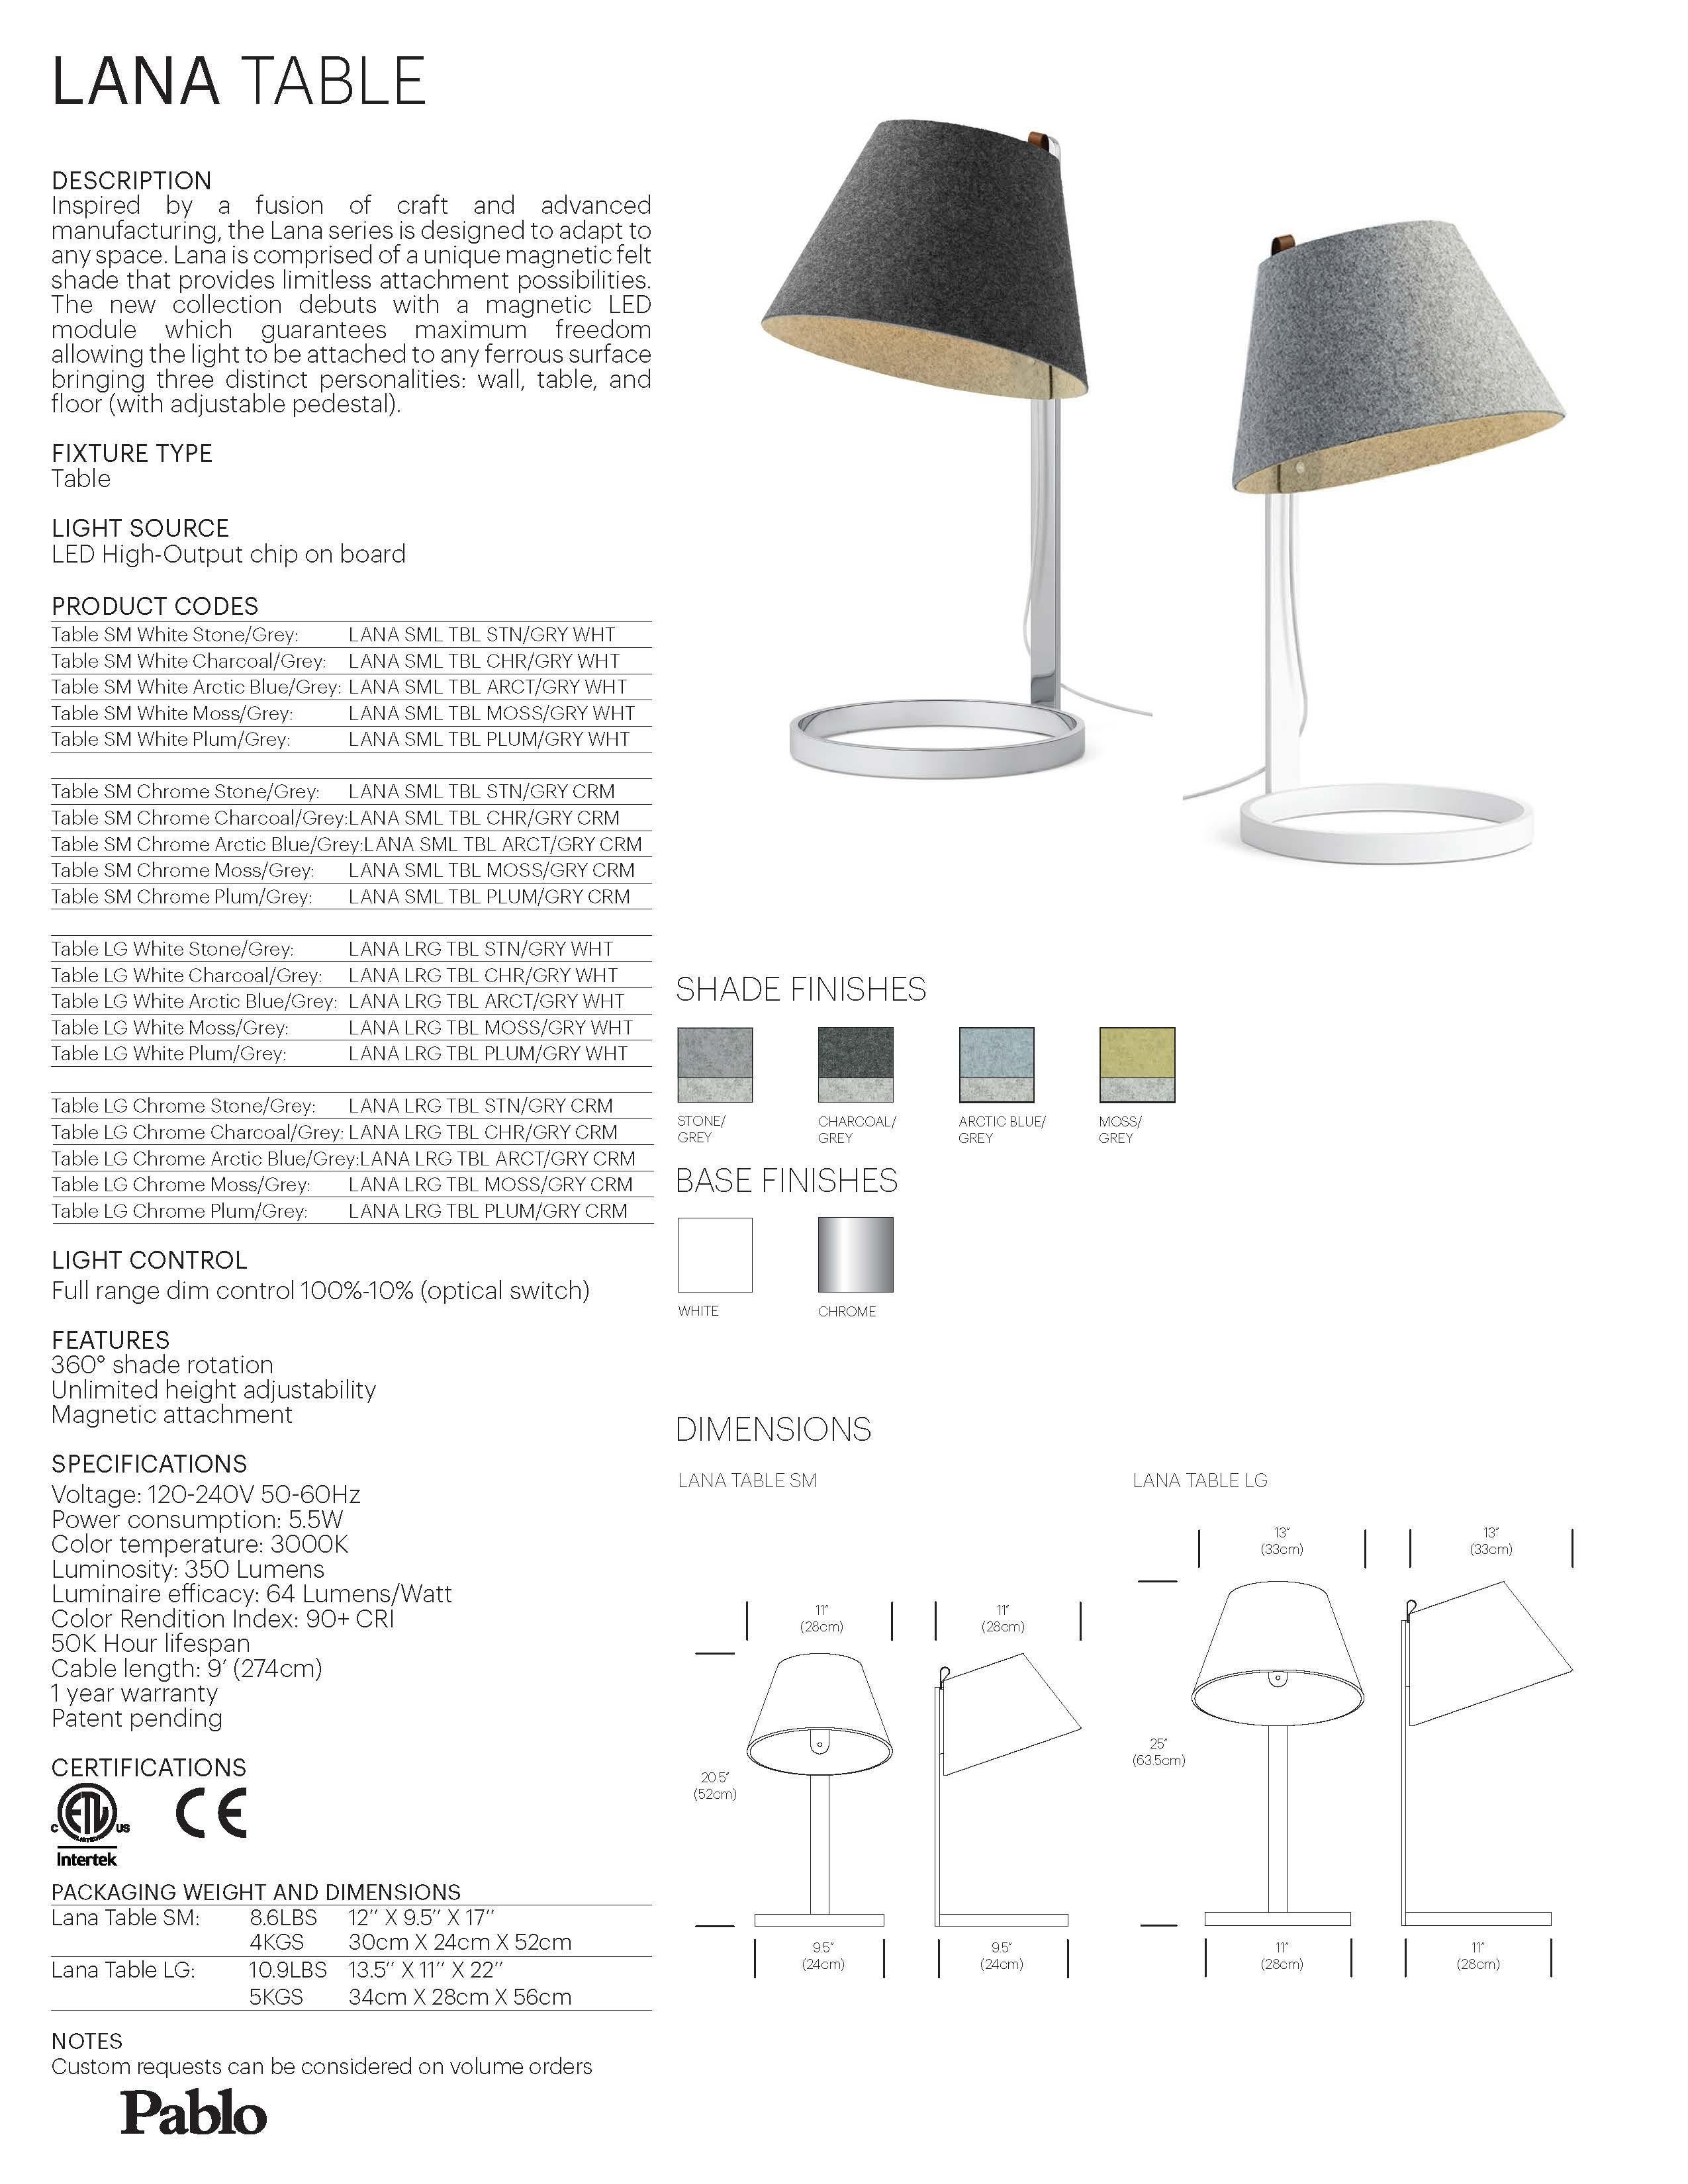 American Lana Large Table Lamp in Moss and Grey with White Base by Pablo Designs